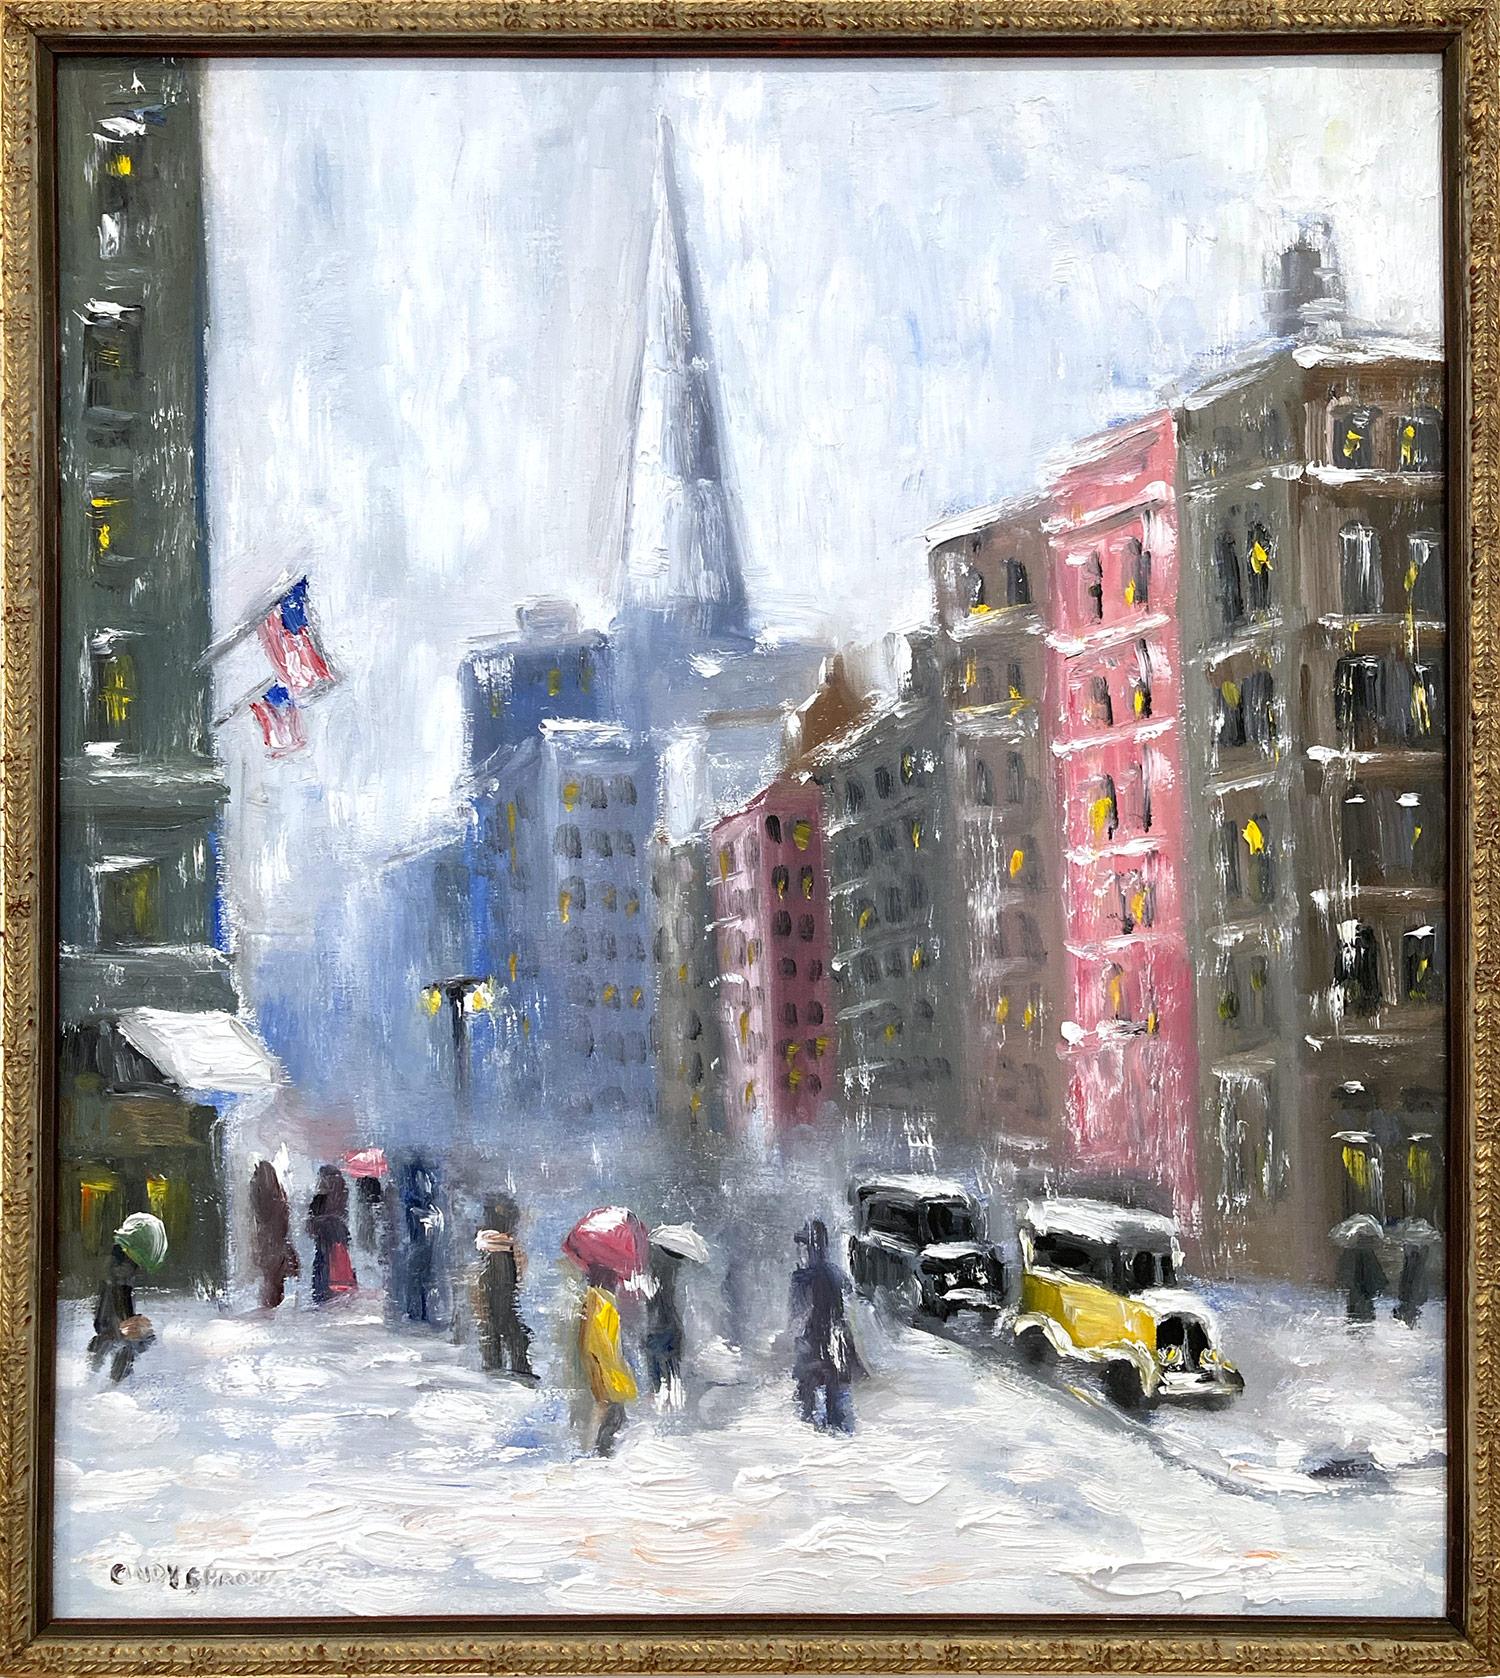 "Snow on 5th Avenue" Impressionistic New York Snow Scene in style of Guy Wiggins